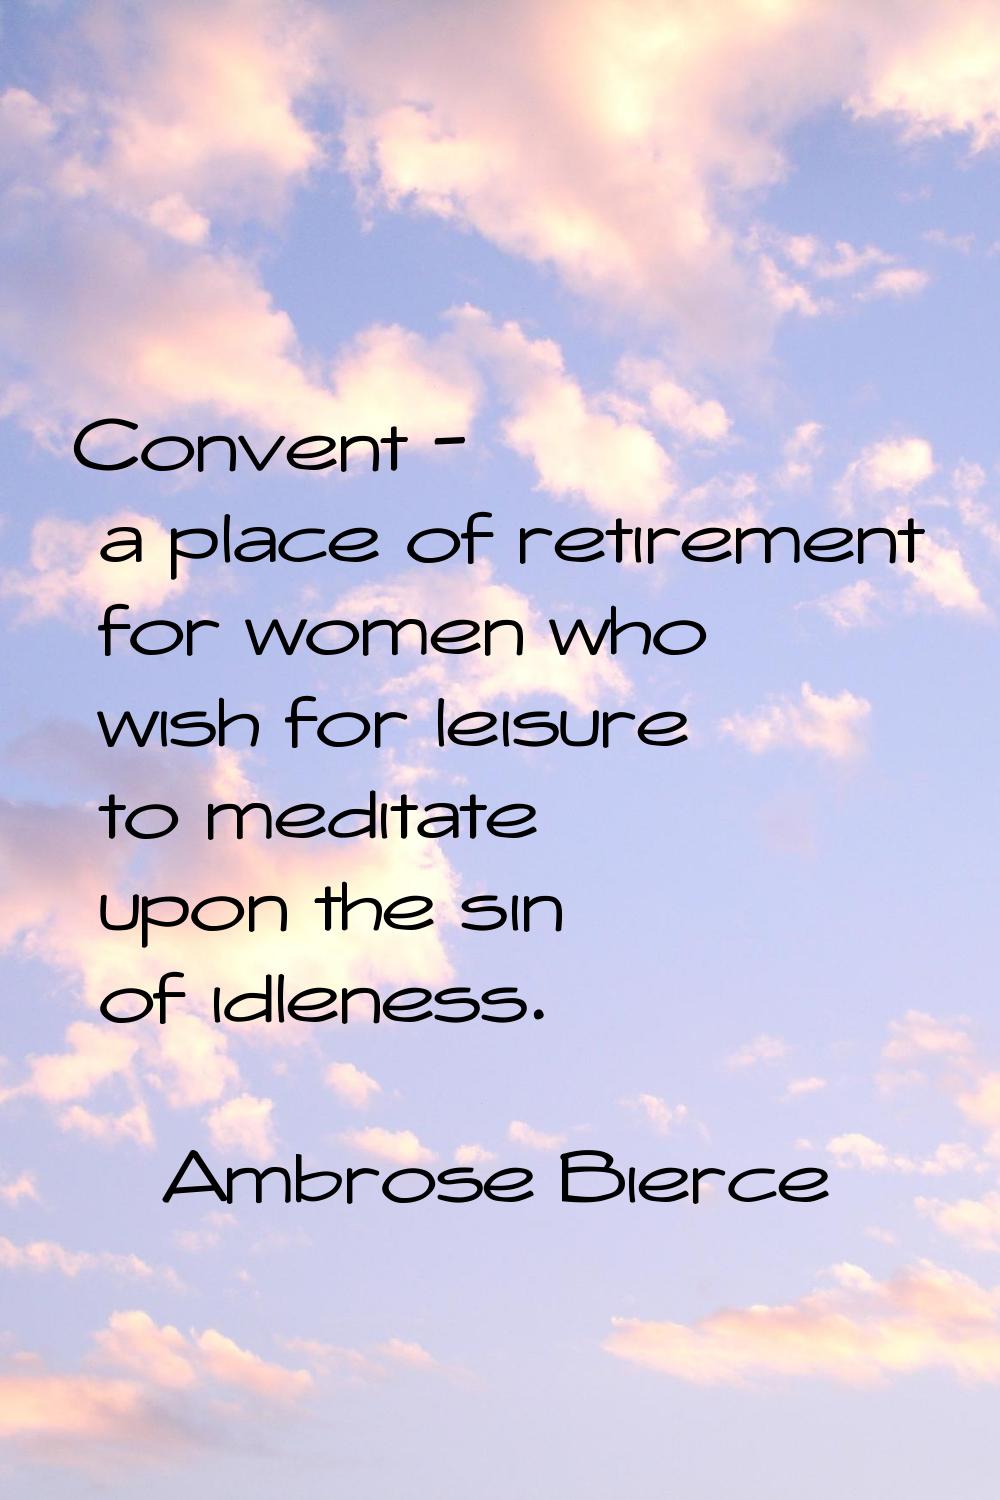 Convent - a place of retirement for women who wish for leisure to meditate upon the sin of idleness